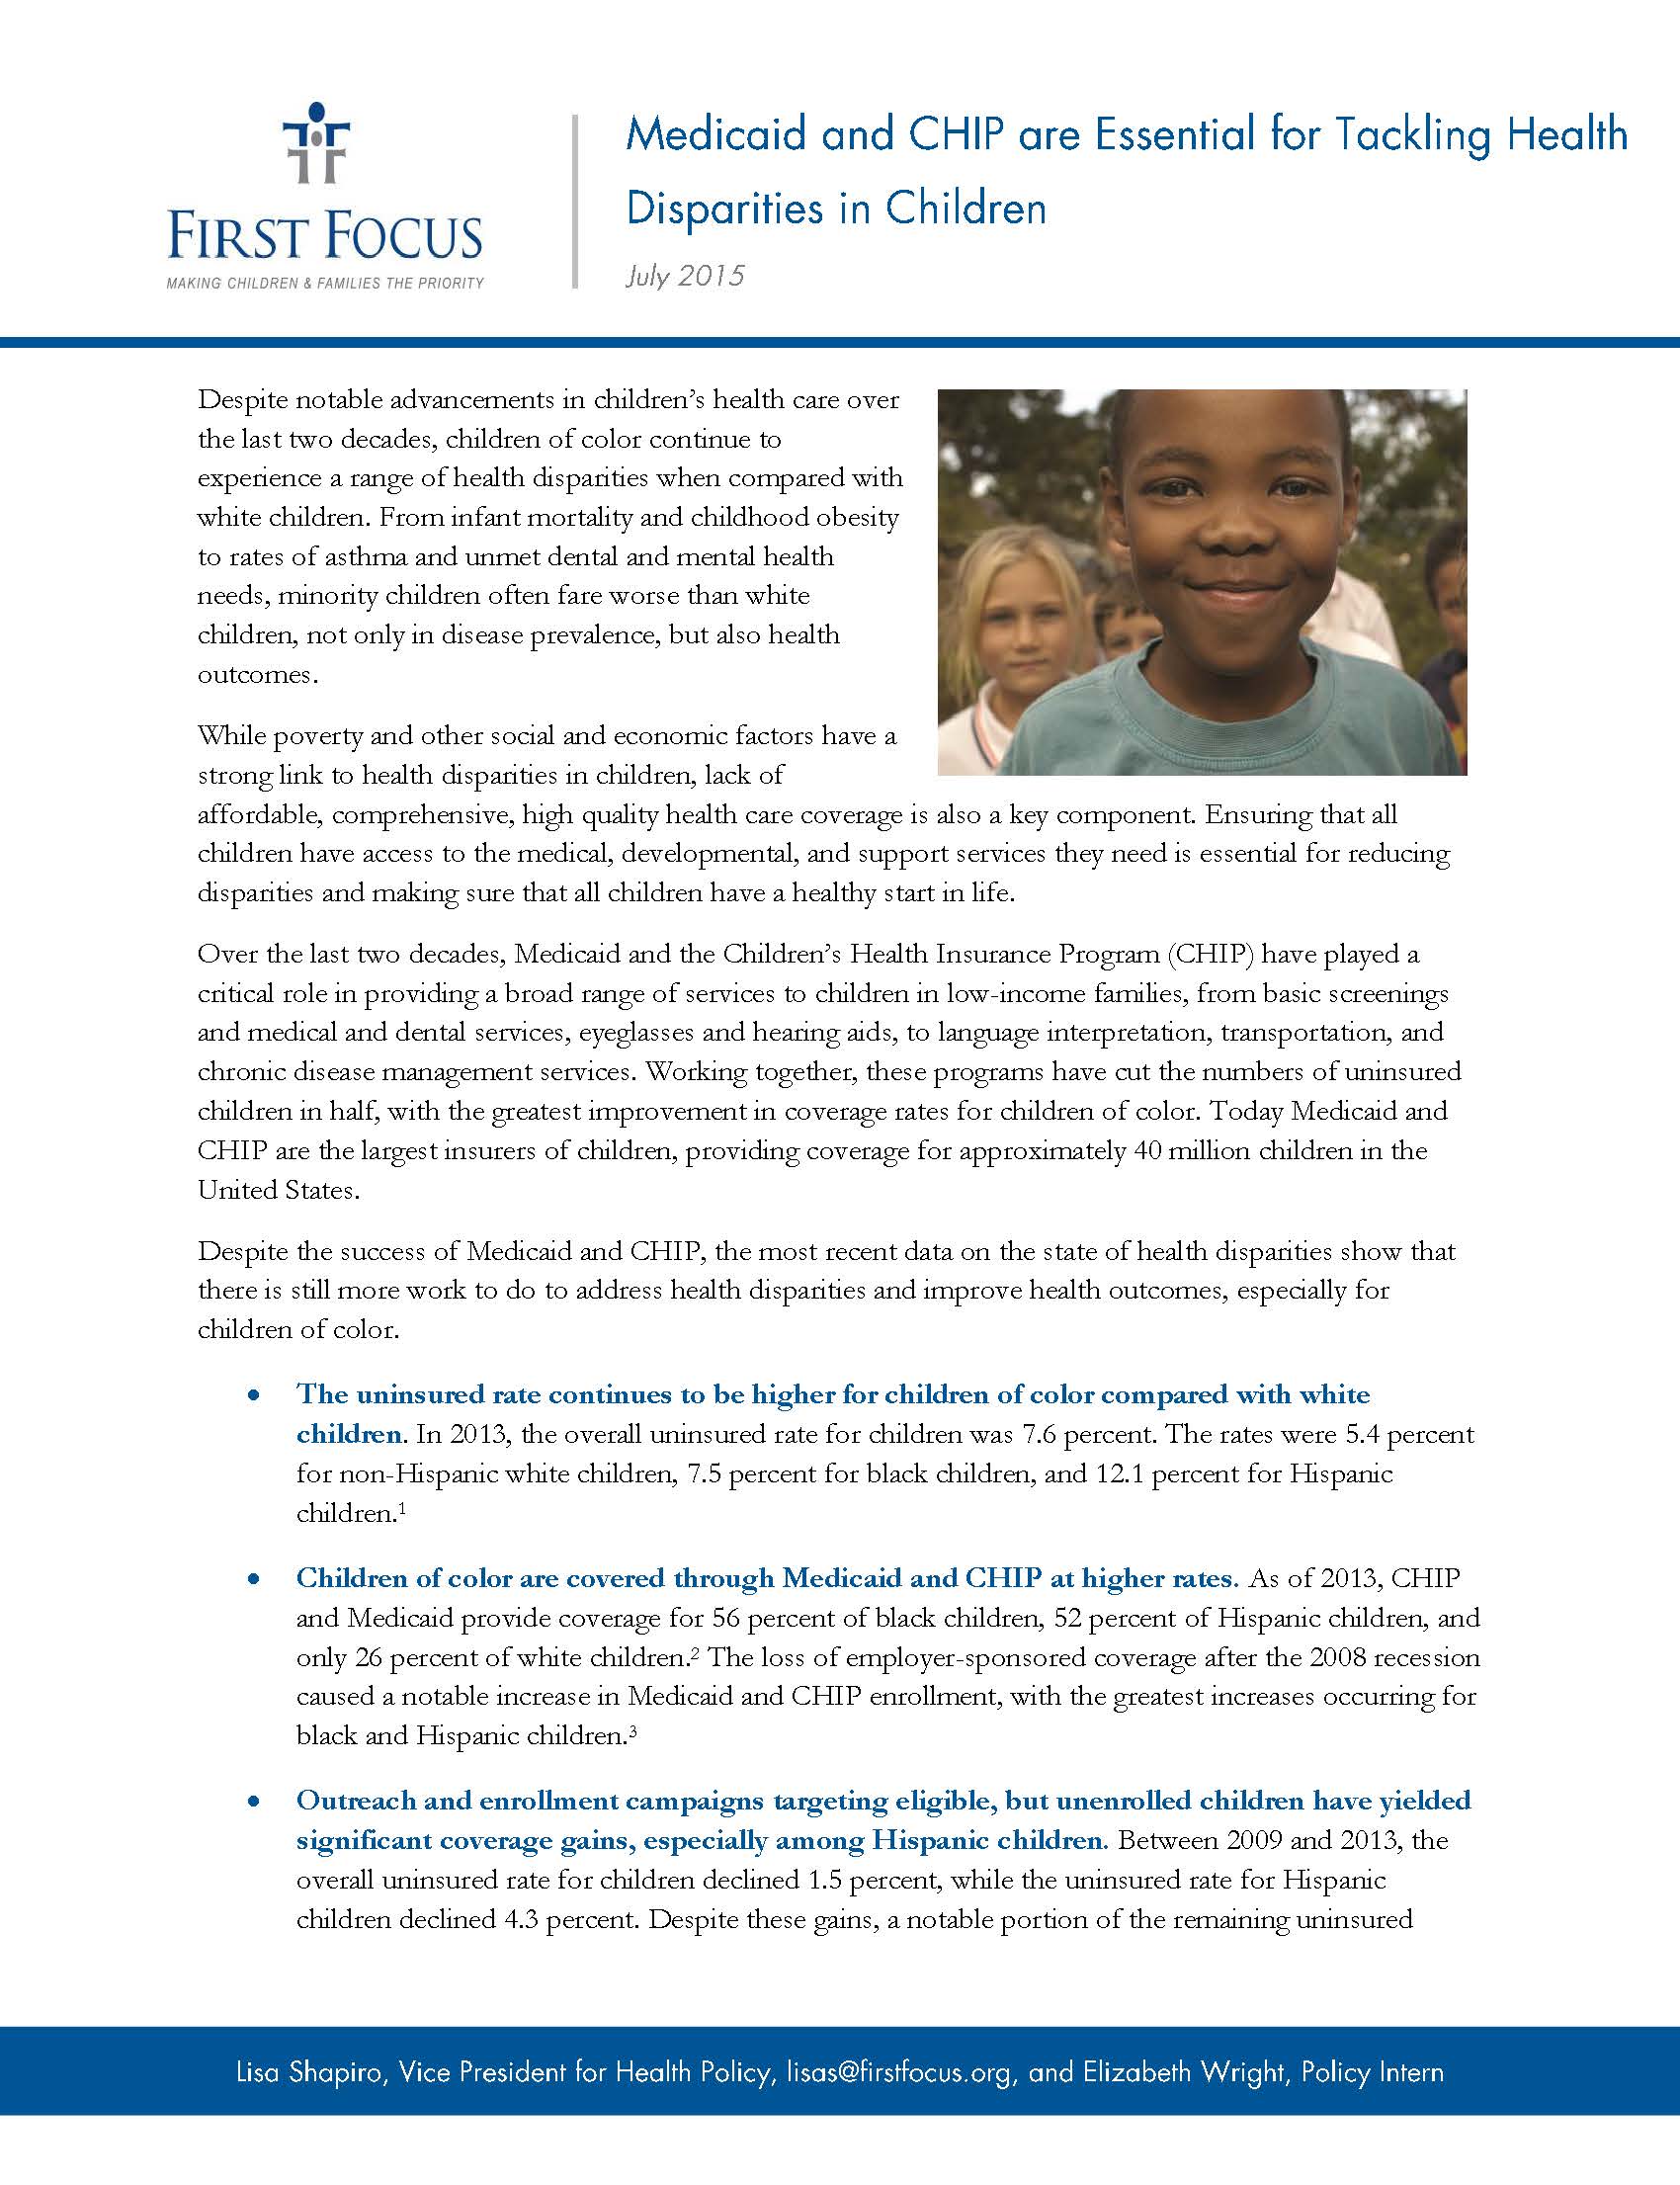 Medicaid and CHIP are Essential for Tackling Health Disparities in Children_Page_1